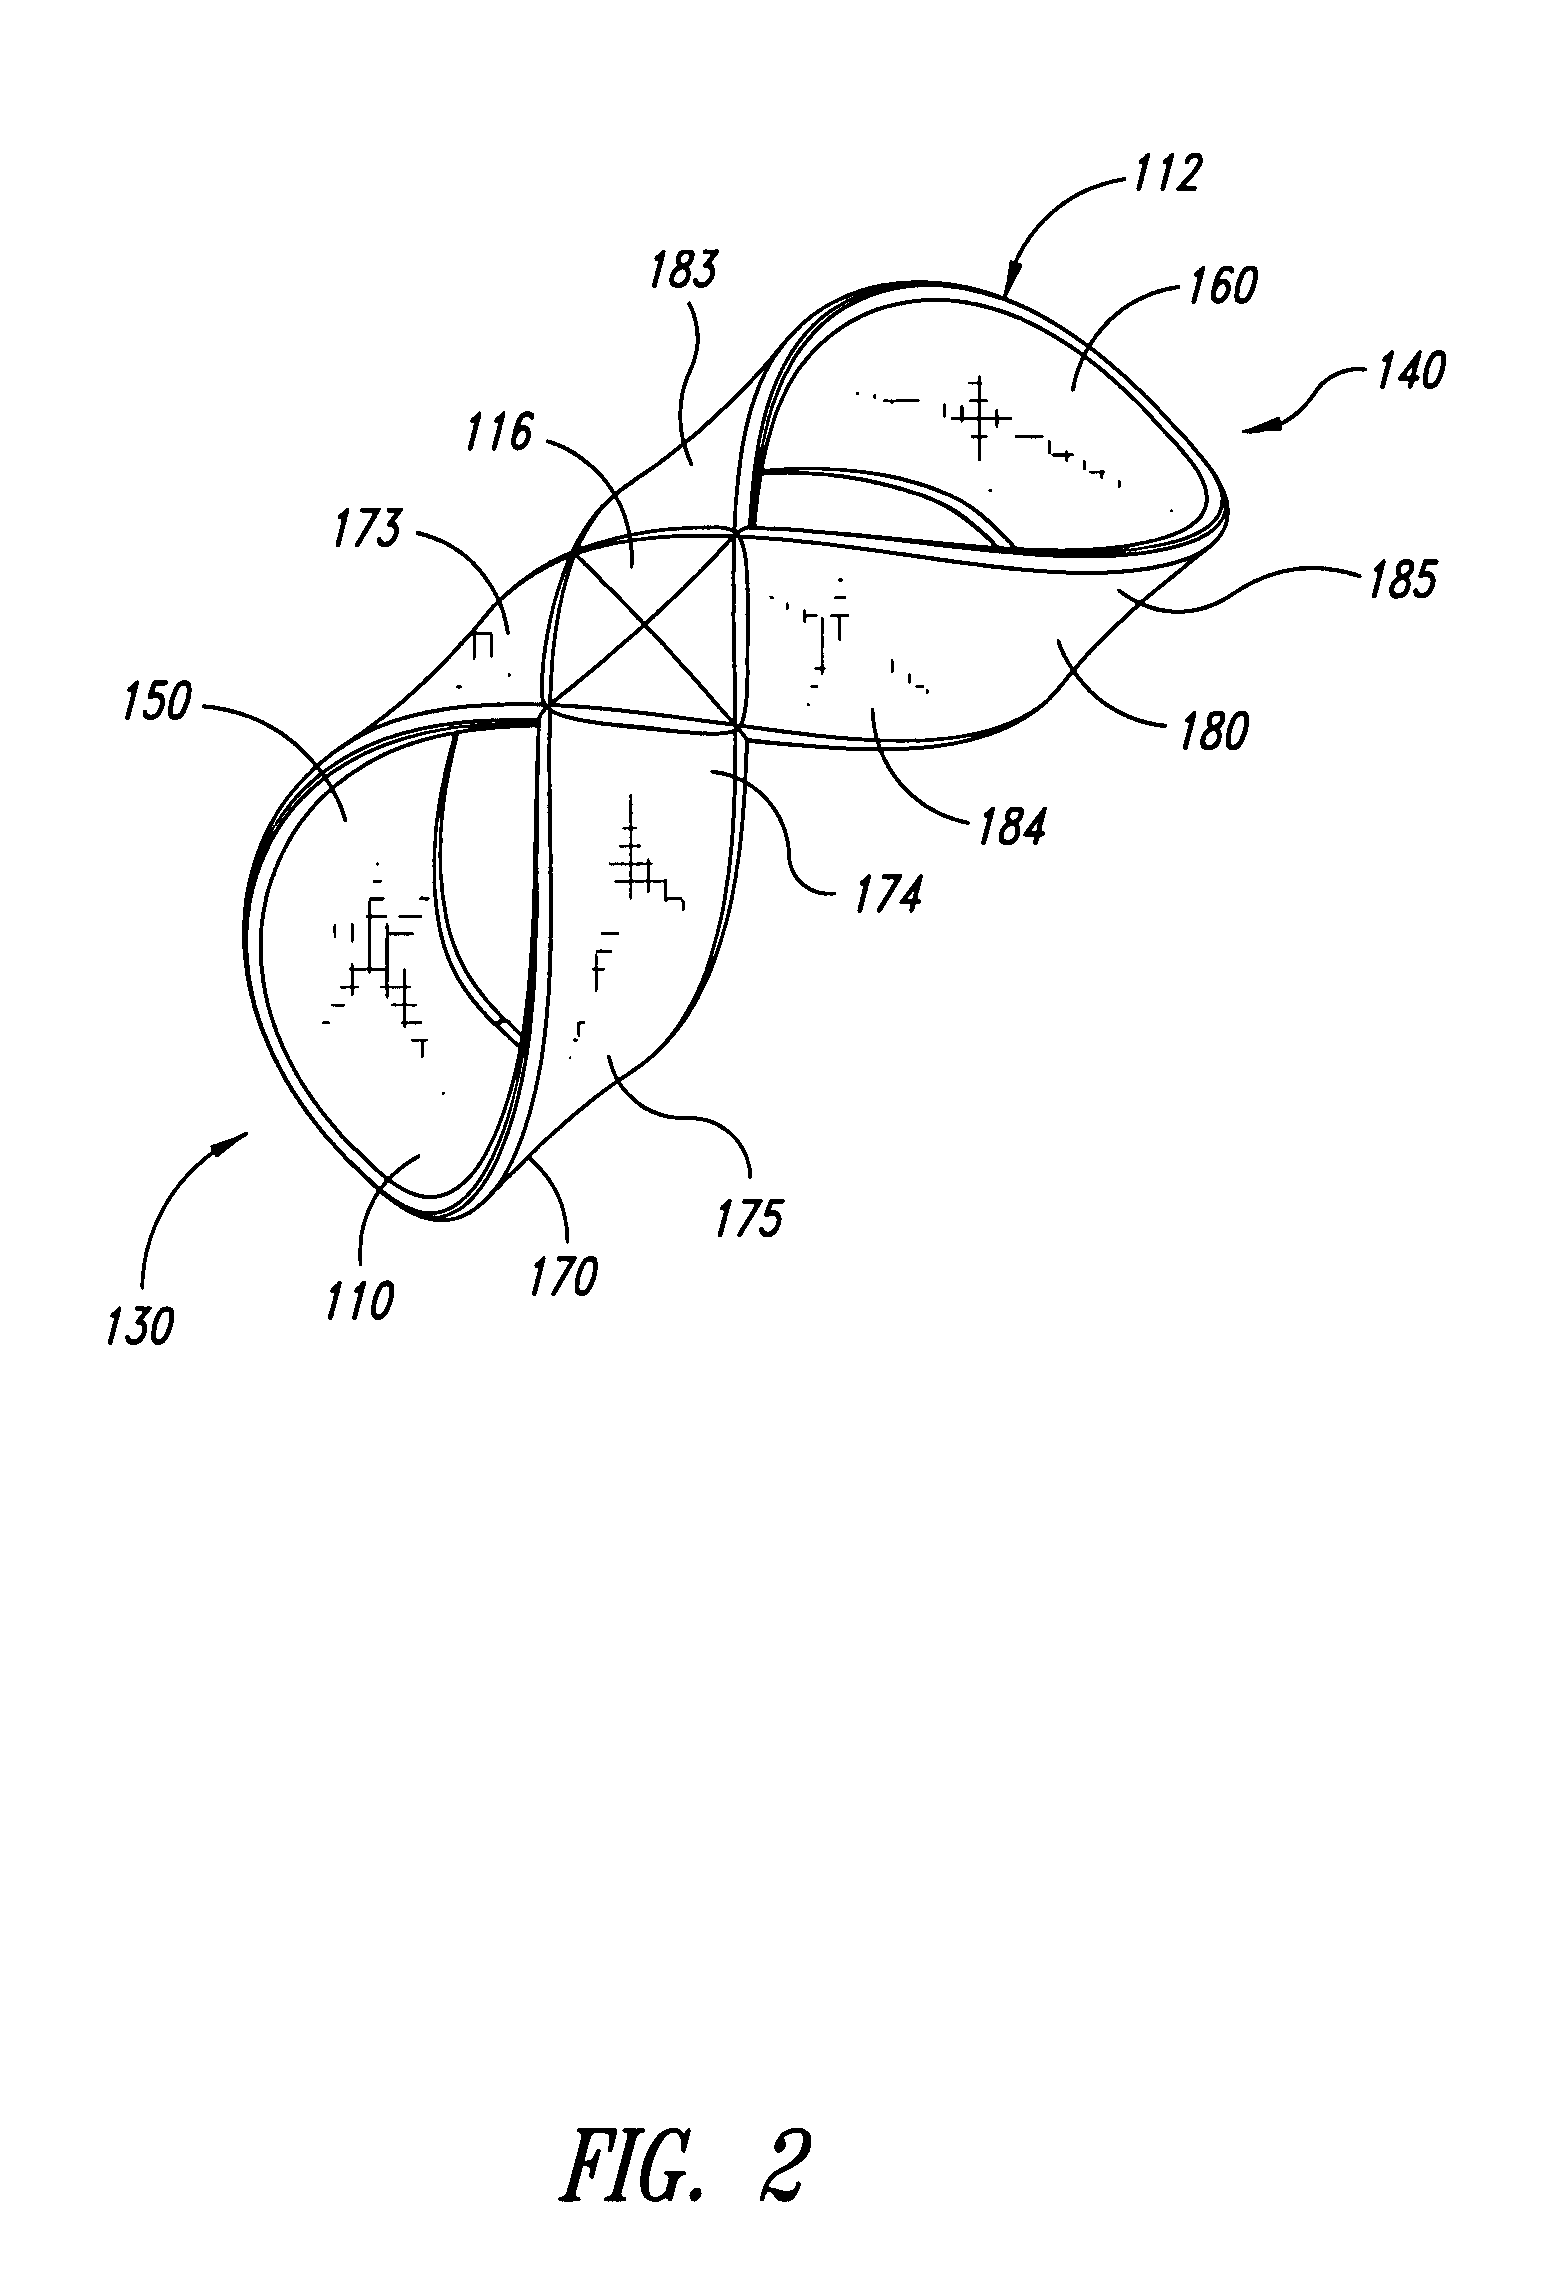 Arm retention system for physical therapy